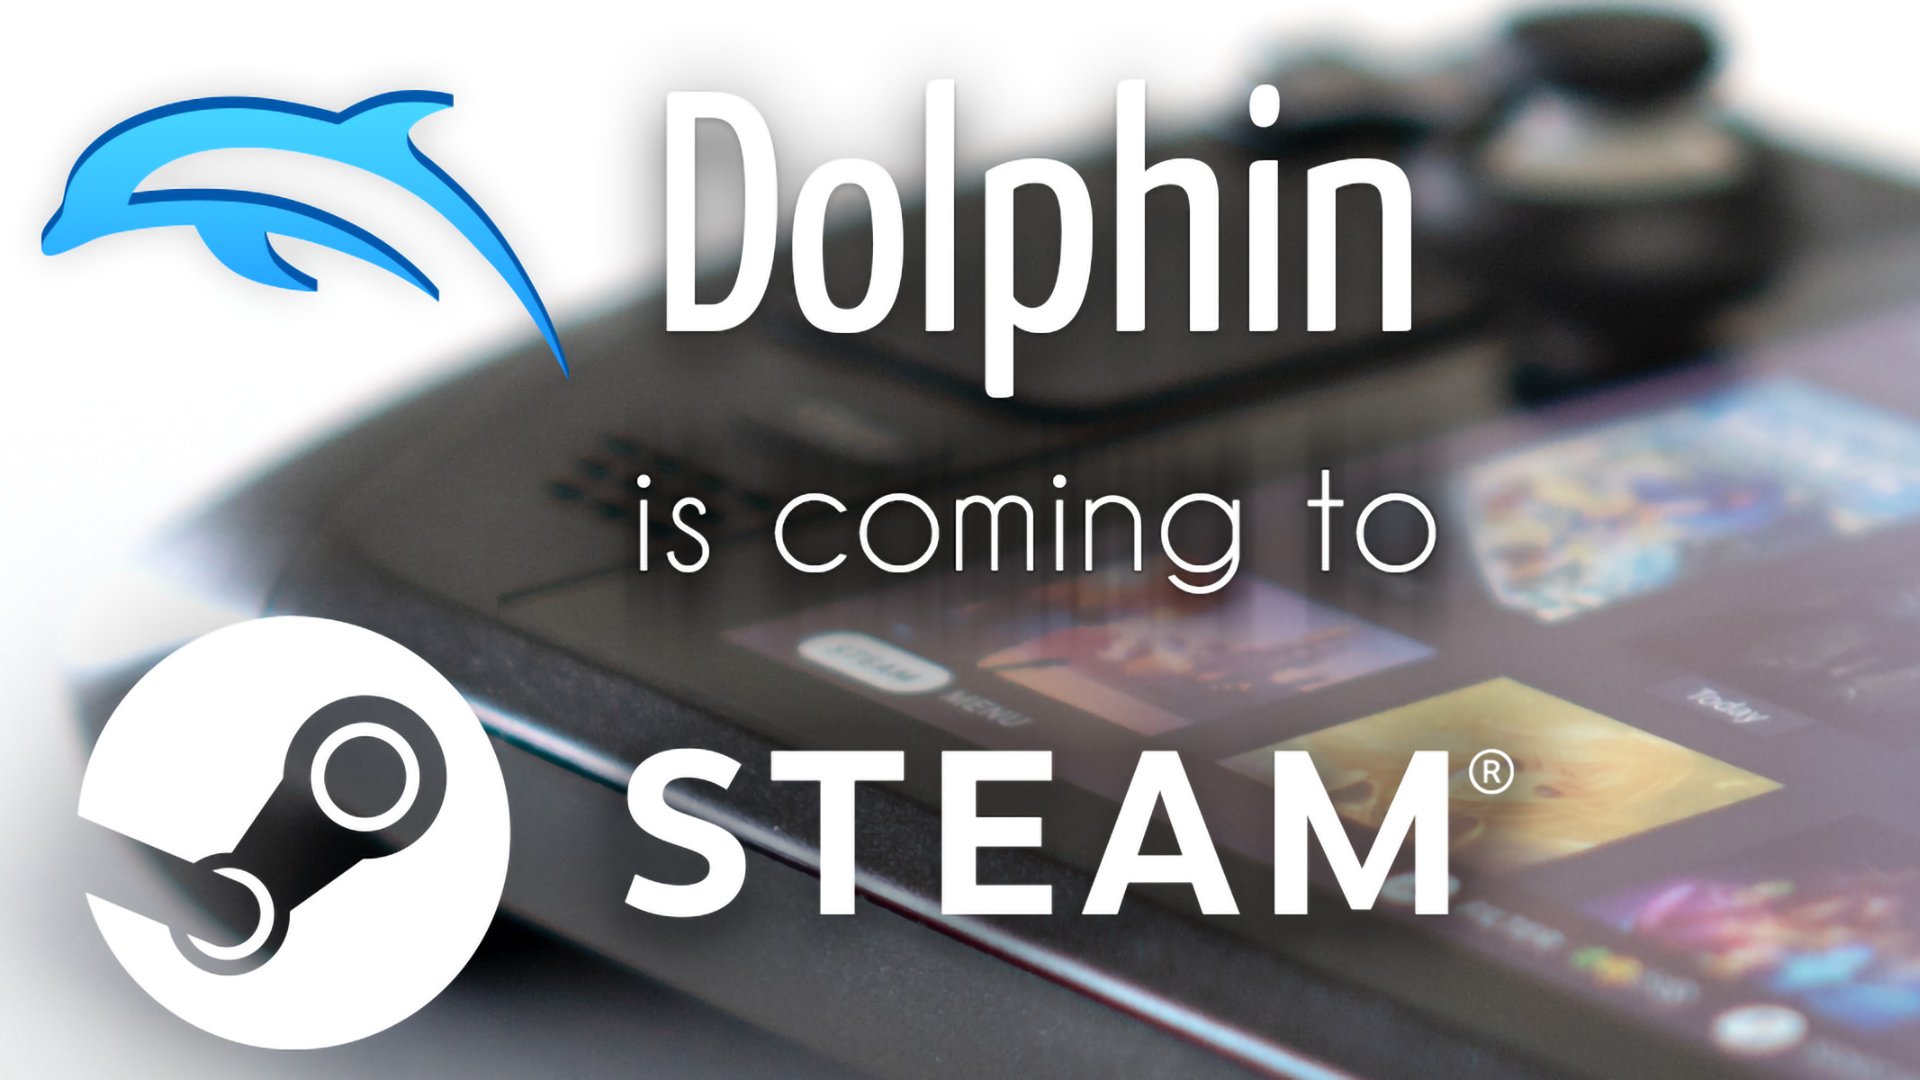 paperback plank straf GameCube and Wii emulator Dolphin is coming to Steam | VGC